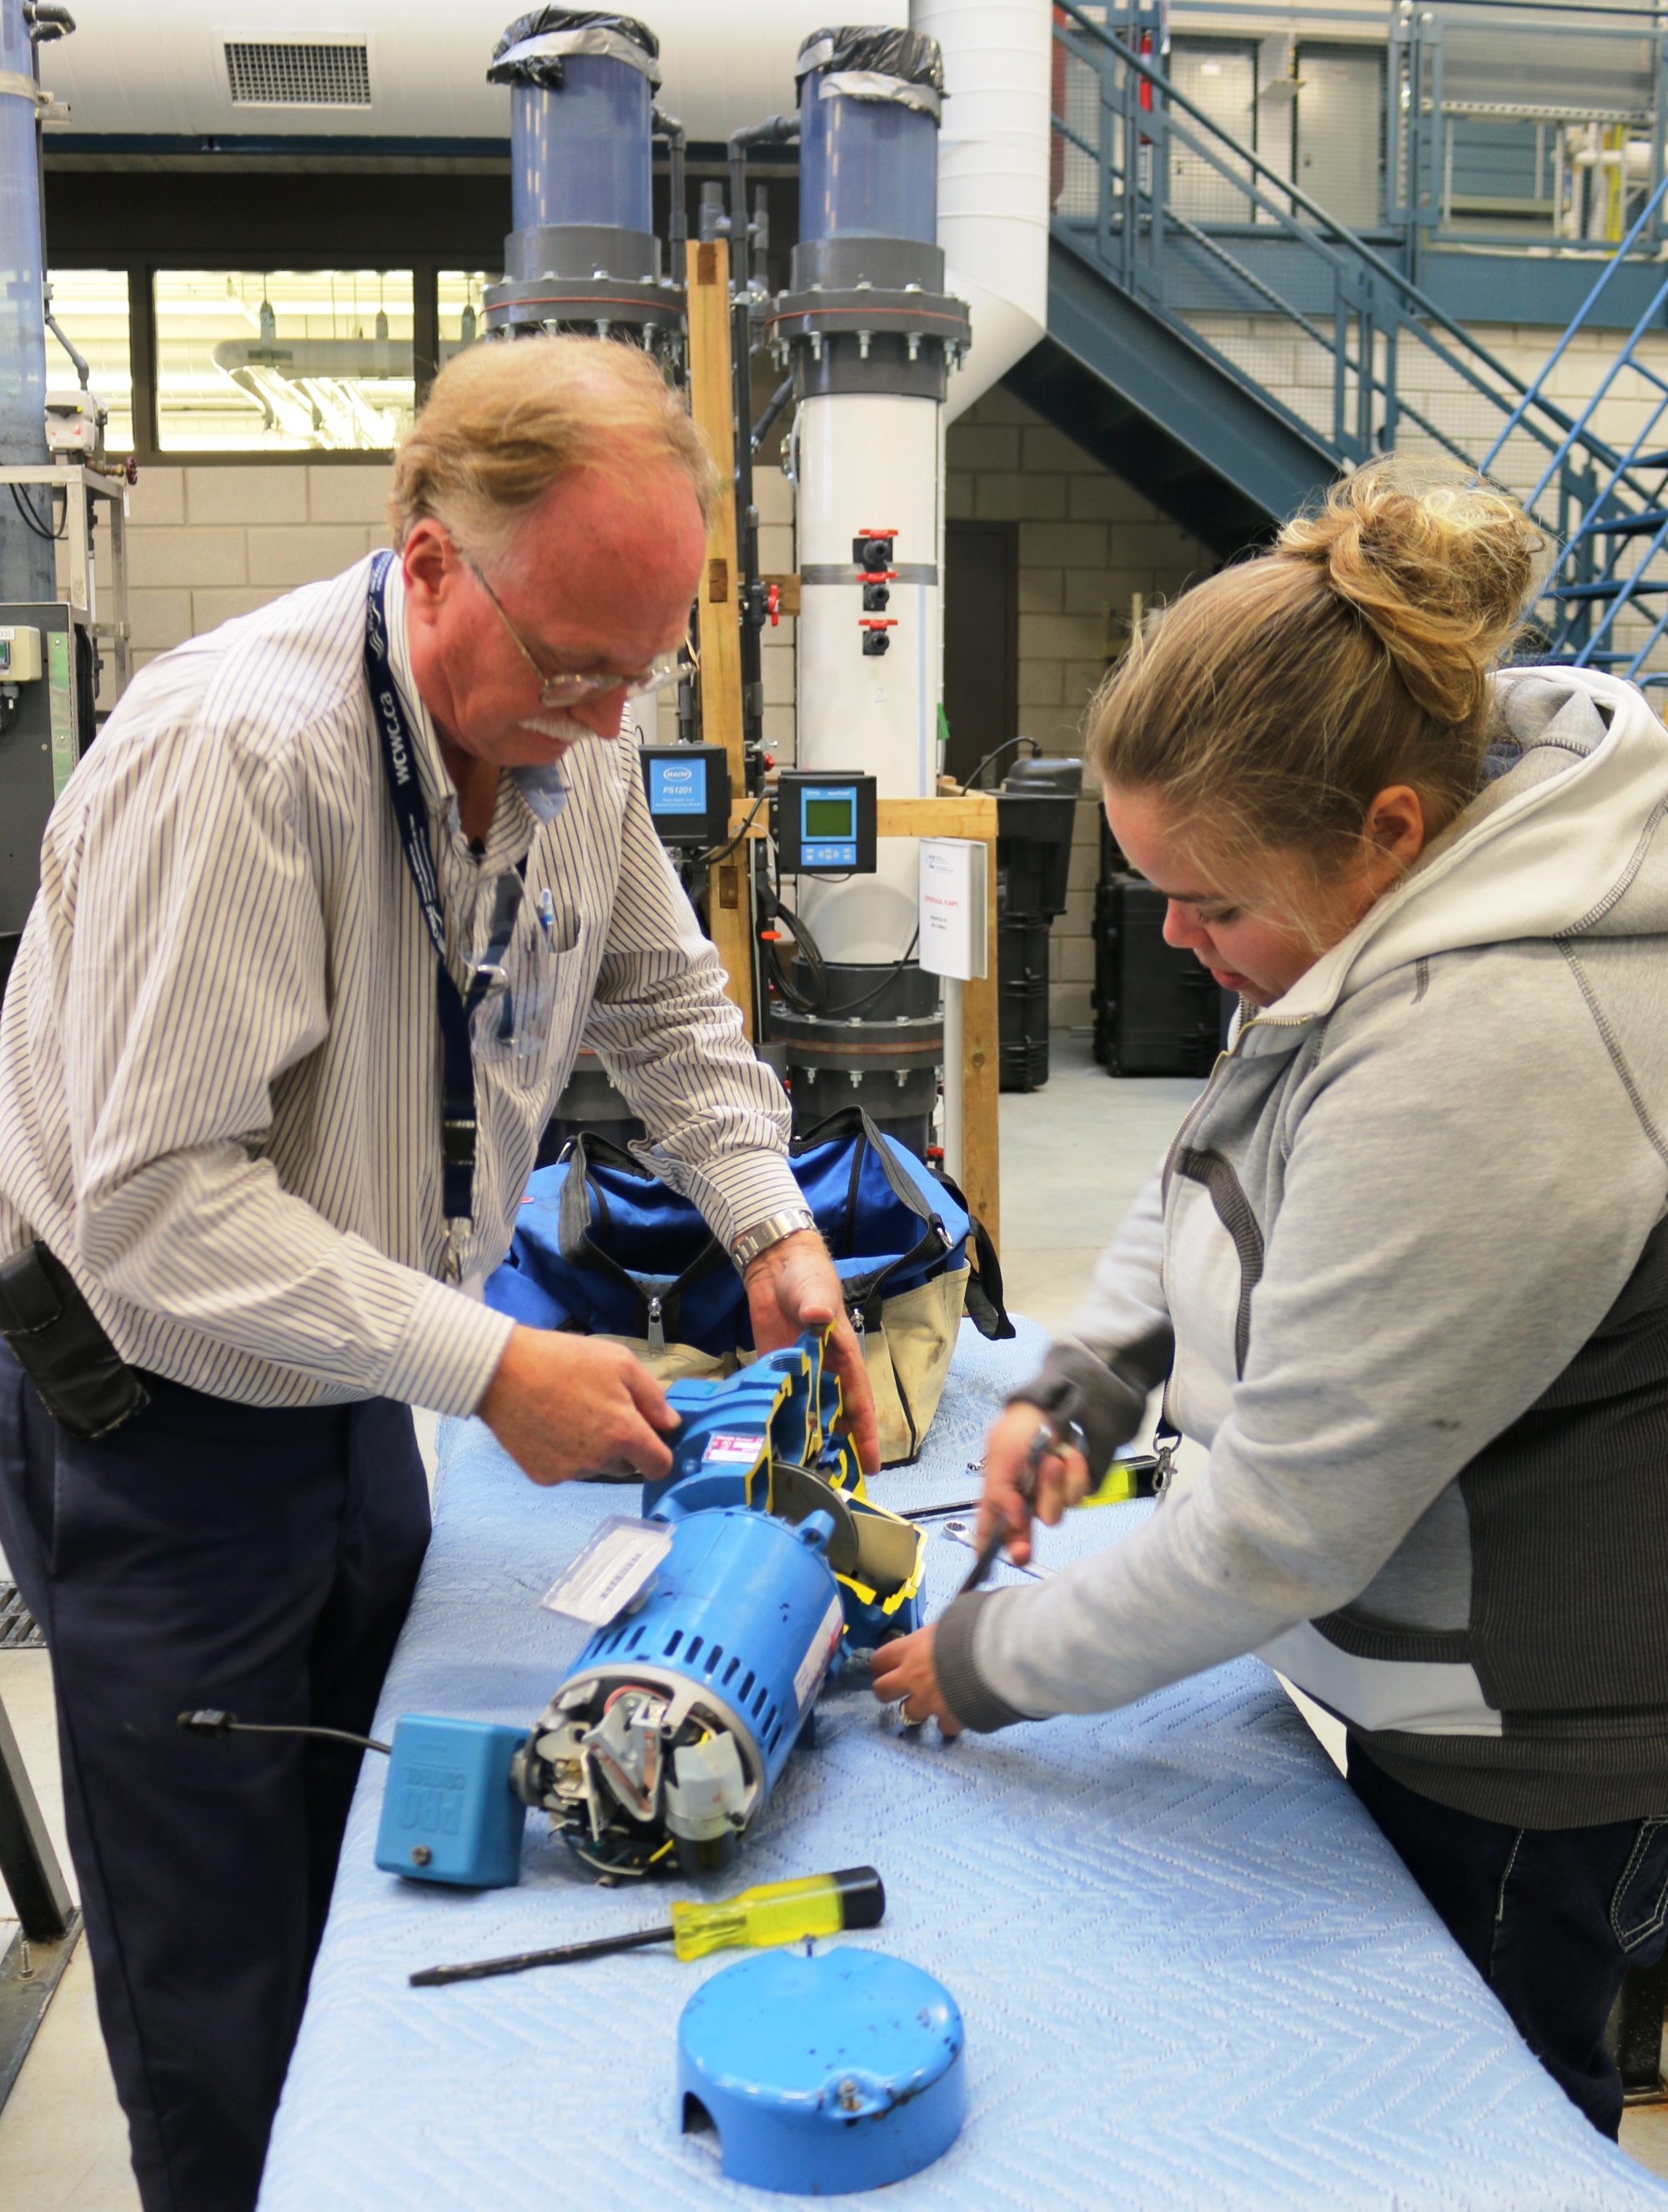 Hands-On Small Systems Workshop Held At The Walkerton Clean Water Centre